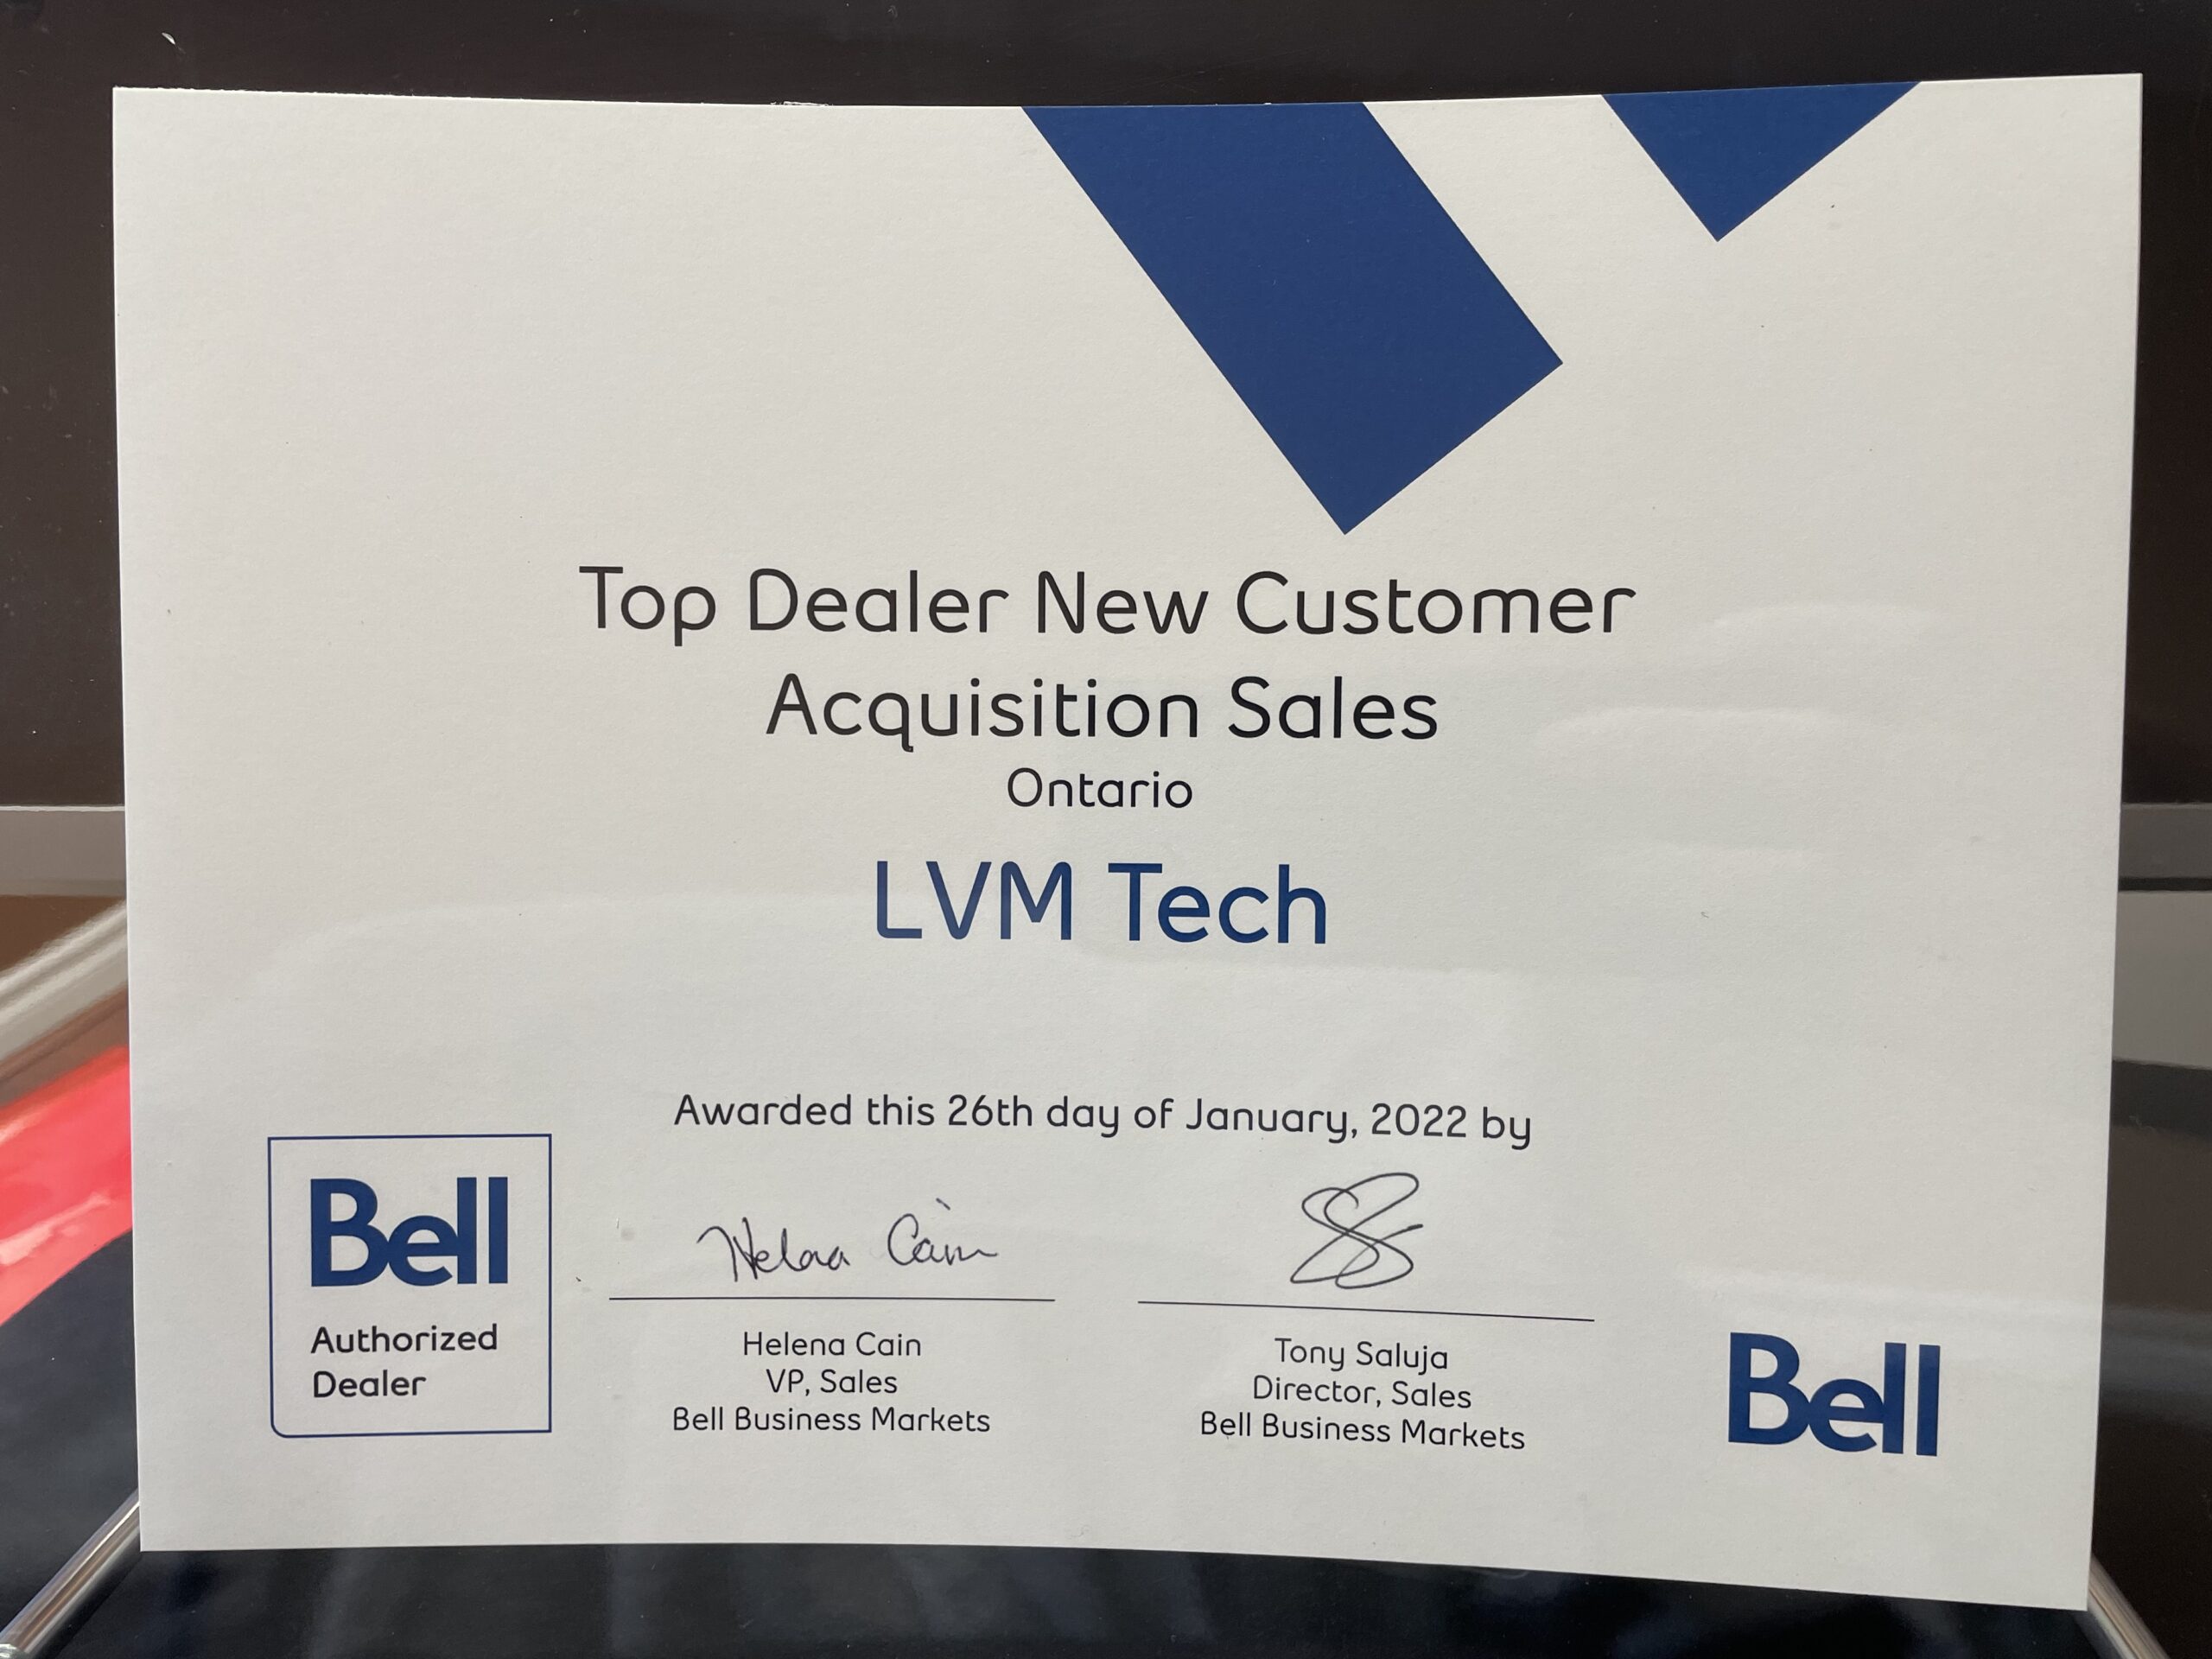 bell top dealer new customer acquisitions sales